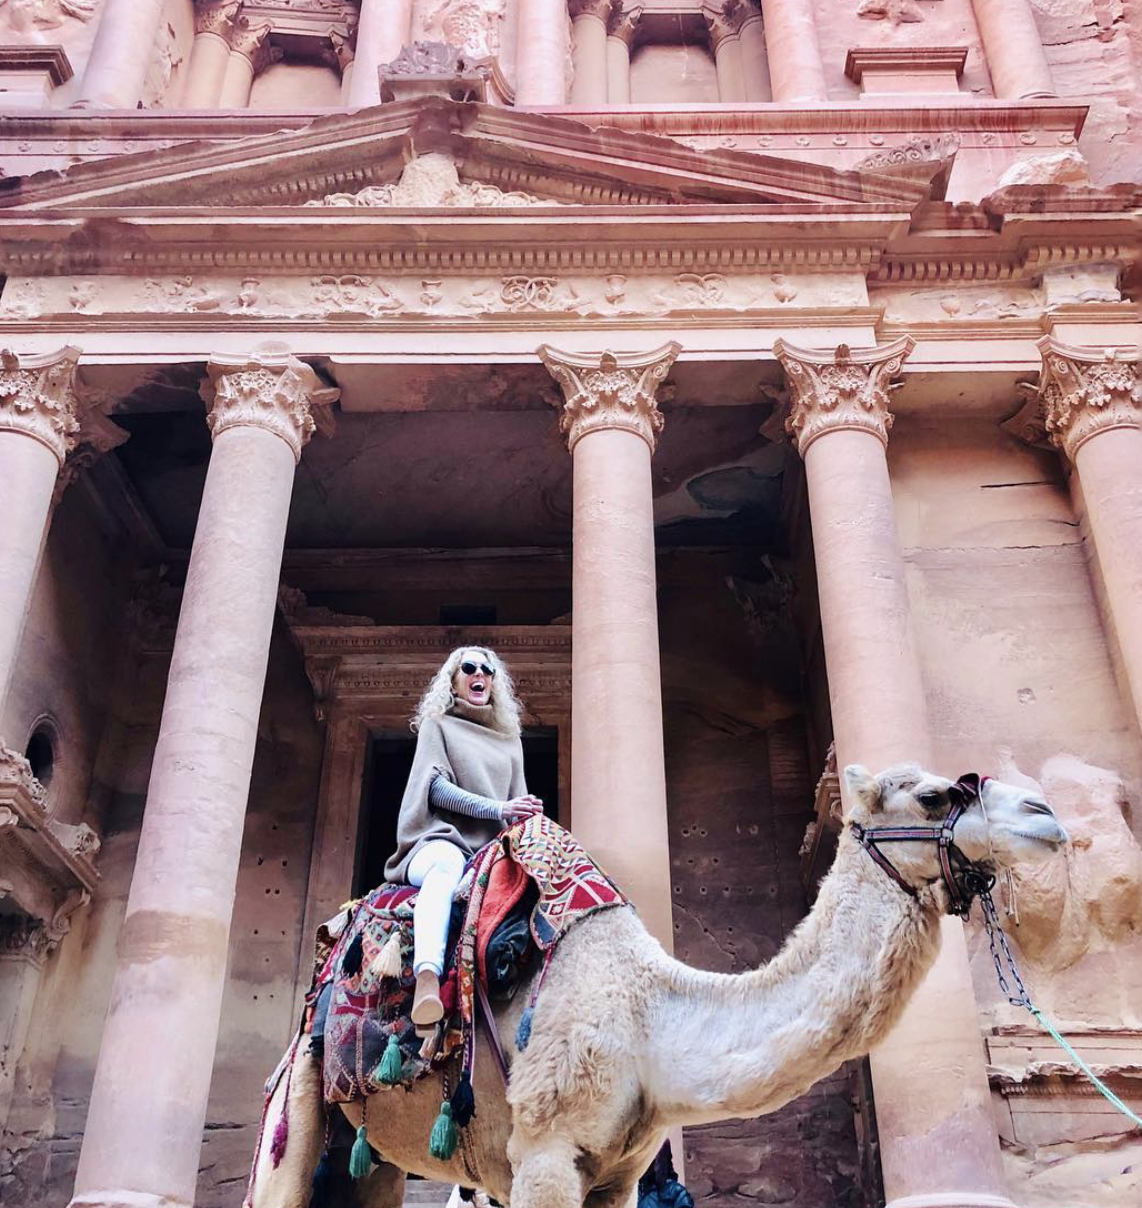 Riding a camel in front of a columned building